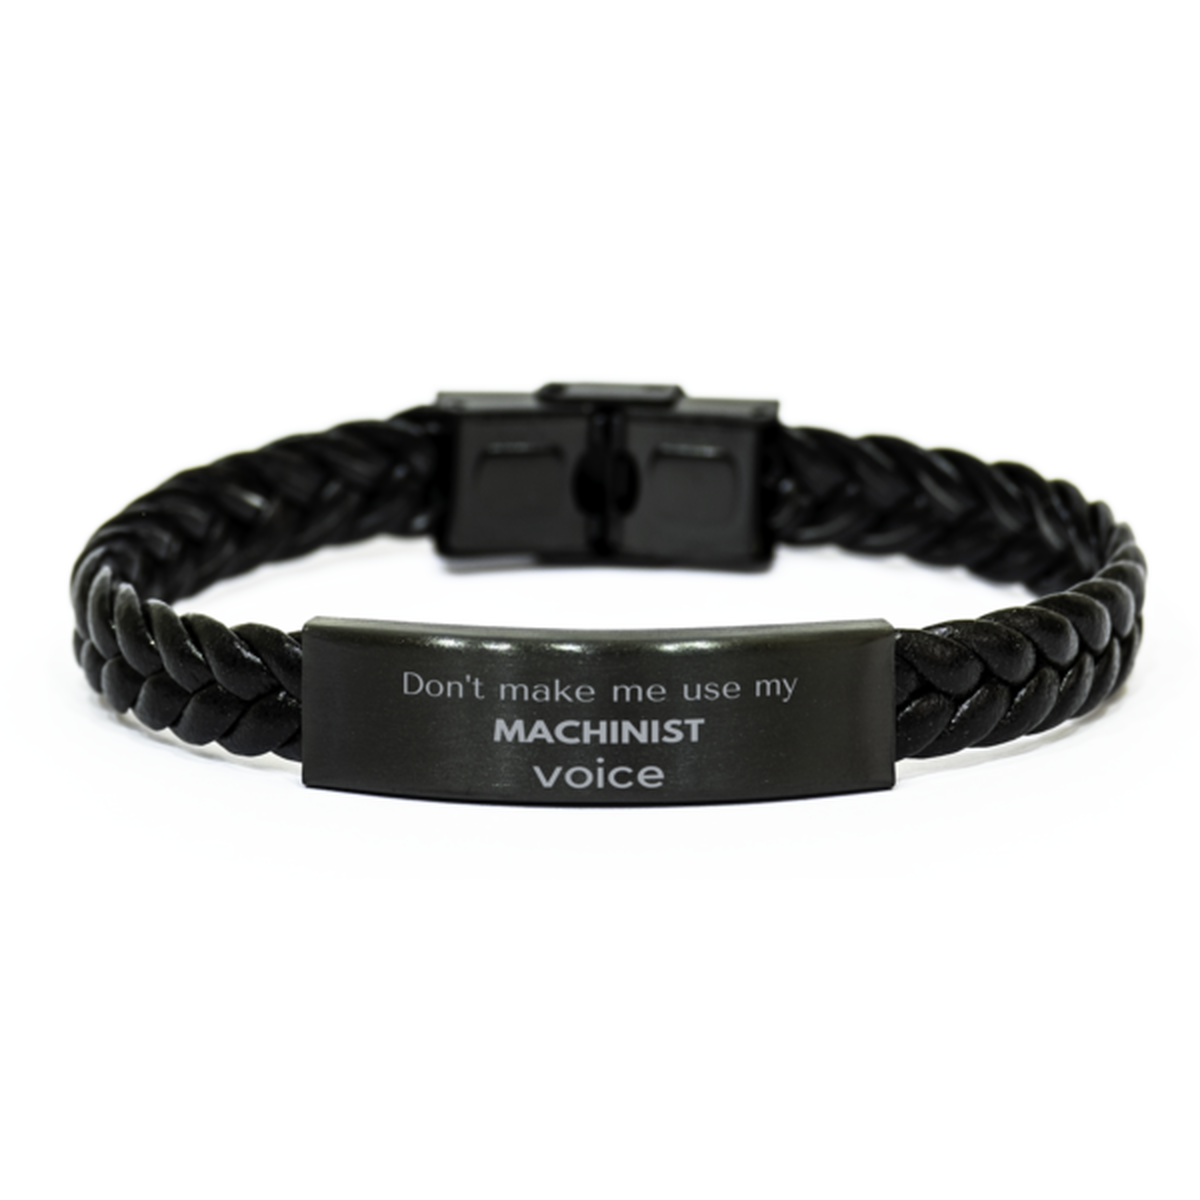 Don't make me use my Machinist voice, Sarcasm Machinist Gifts, Christmas Machinist Braided Leather Bracelet Birthday Unique Gifts For Machinist Coworkers, Men, Women, Colleague, Friends